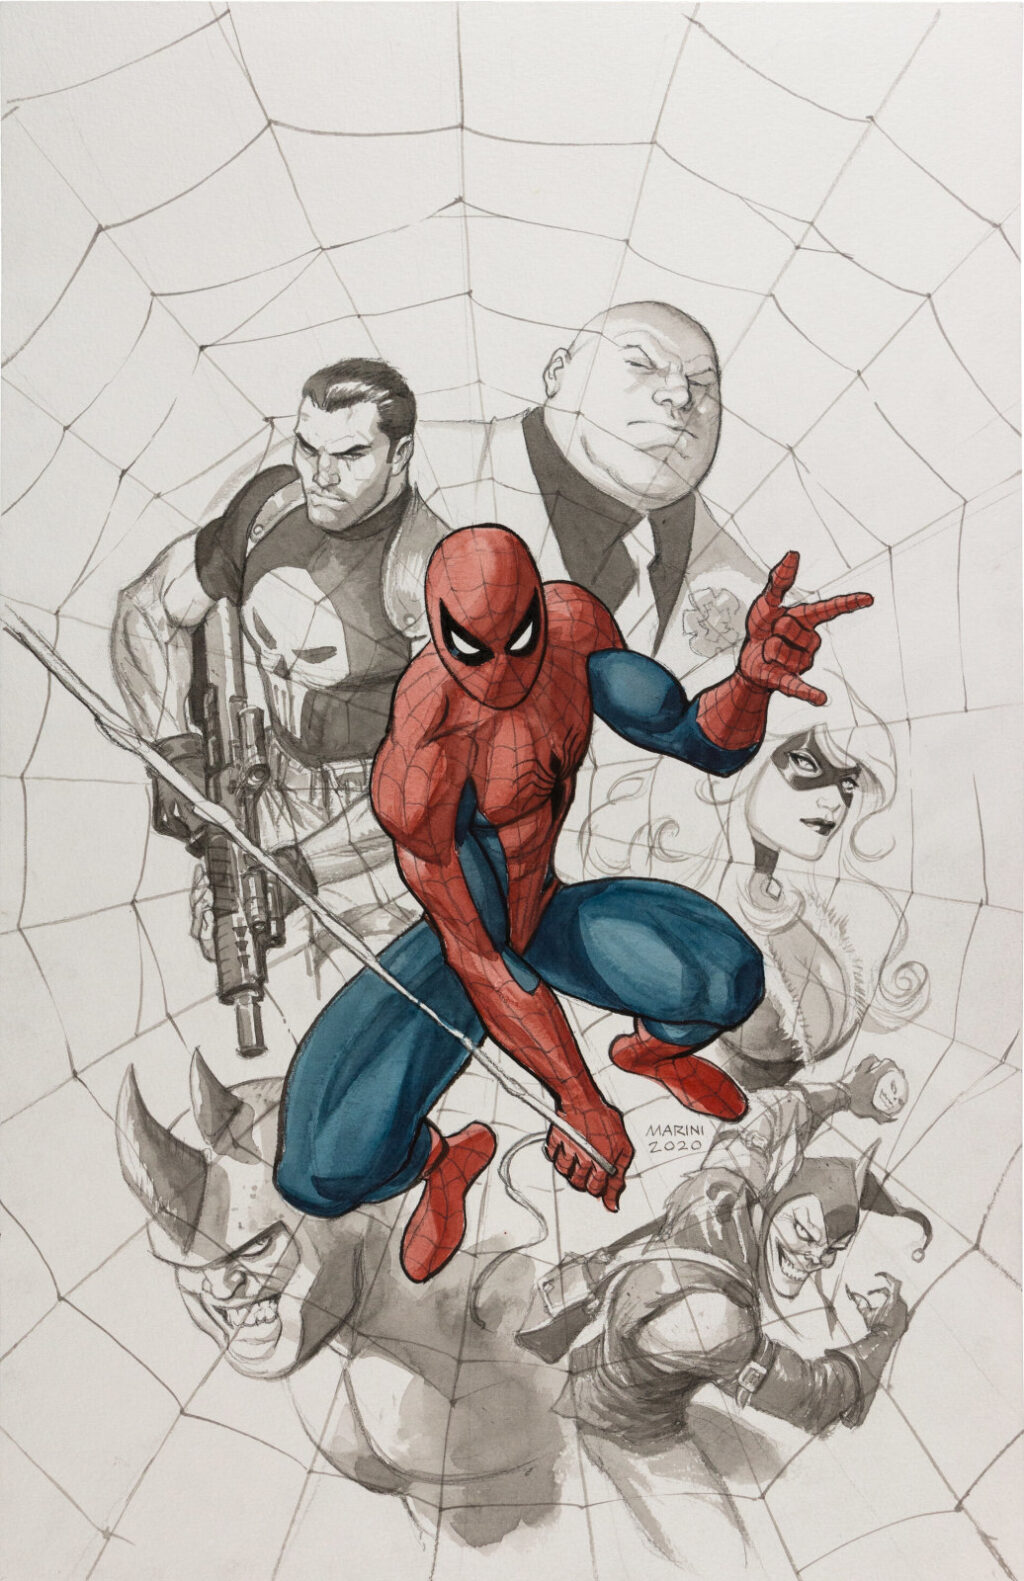 Spider Man issue 23 cover by Enrico Marini